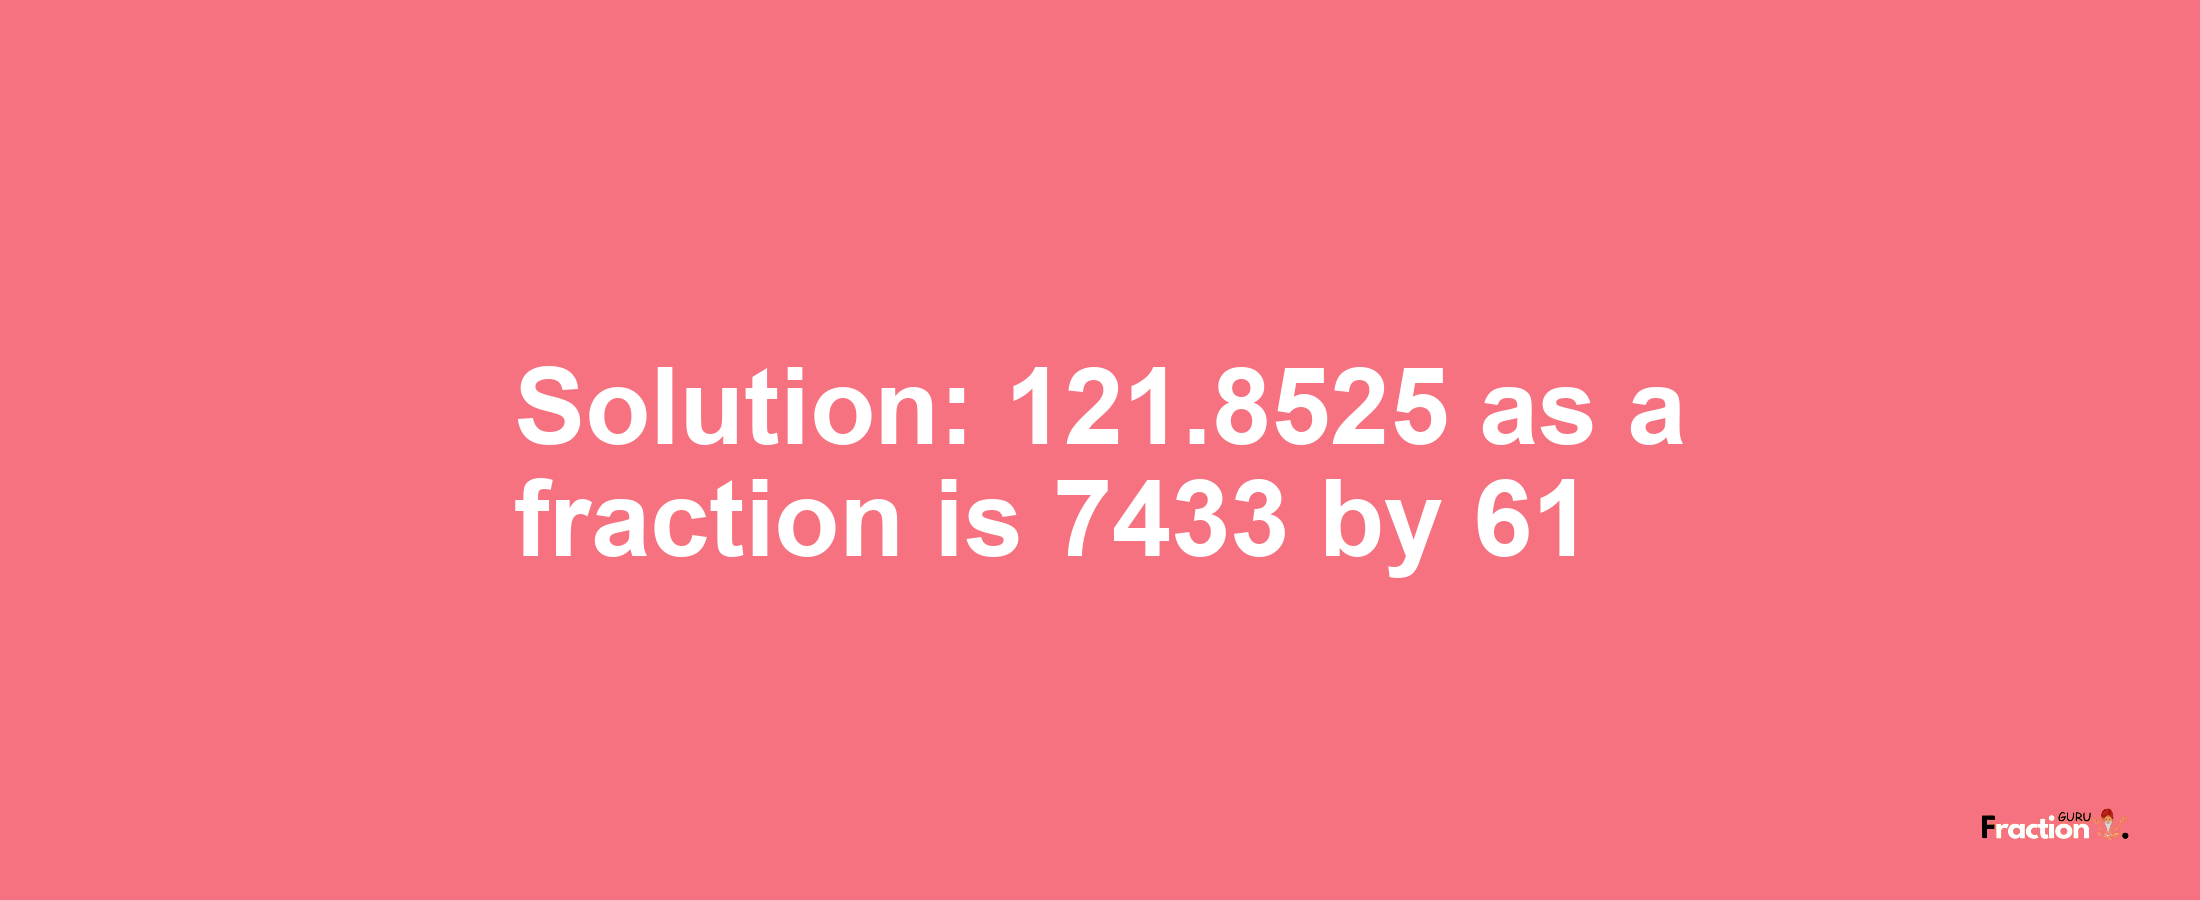 Solution:121.8525 as a fraction is 7433/61